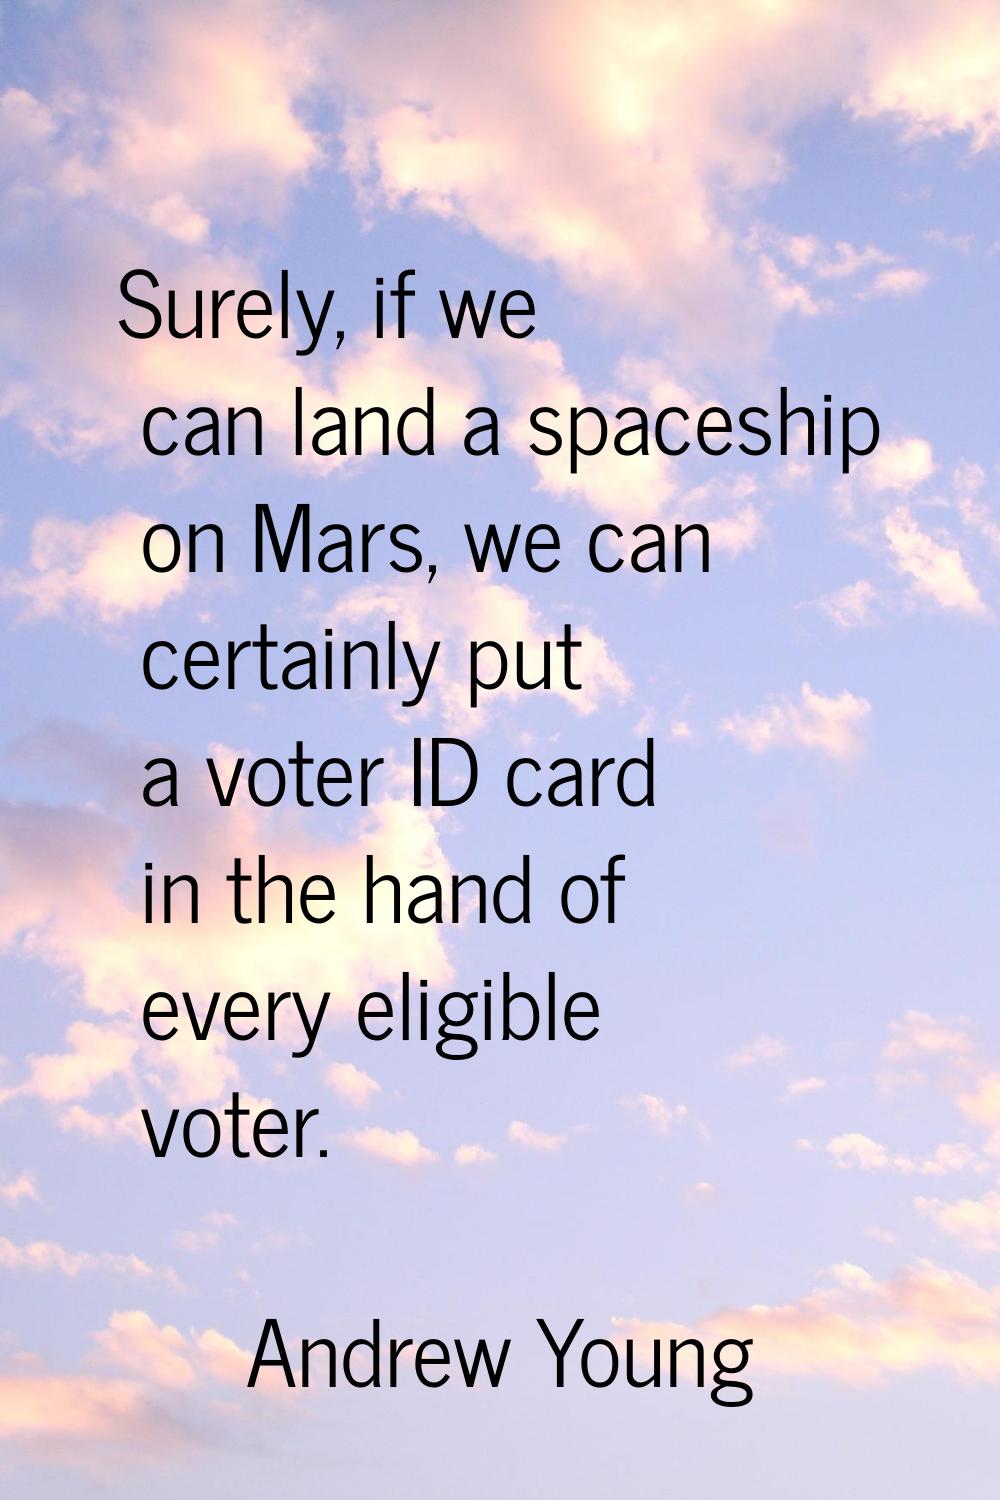 Surely, if we can land a spaceship on Mars, we can certainly put a voter ID card in the hand of eve